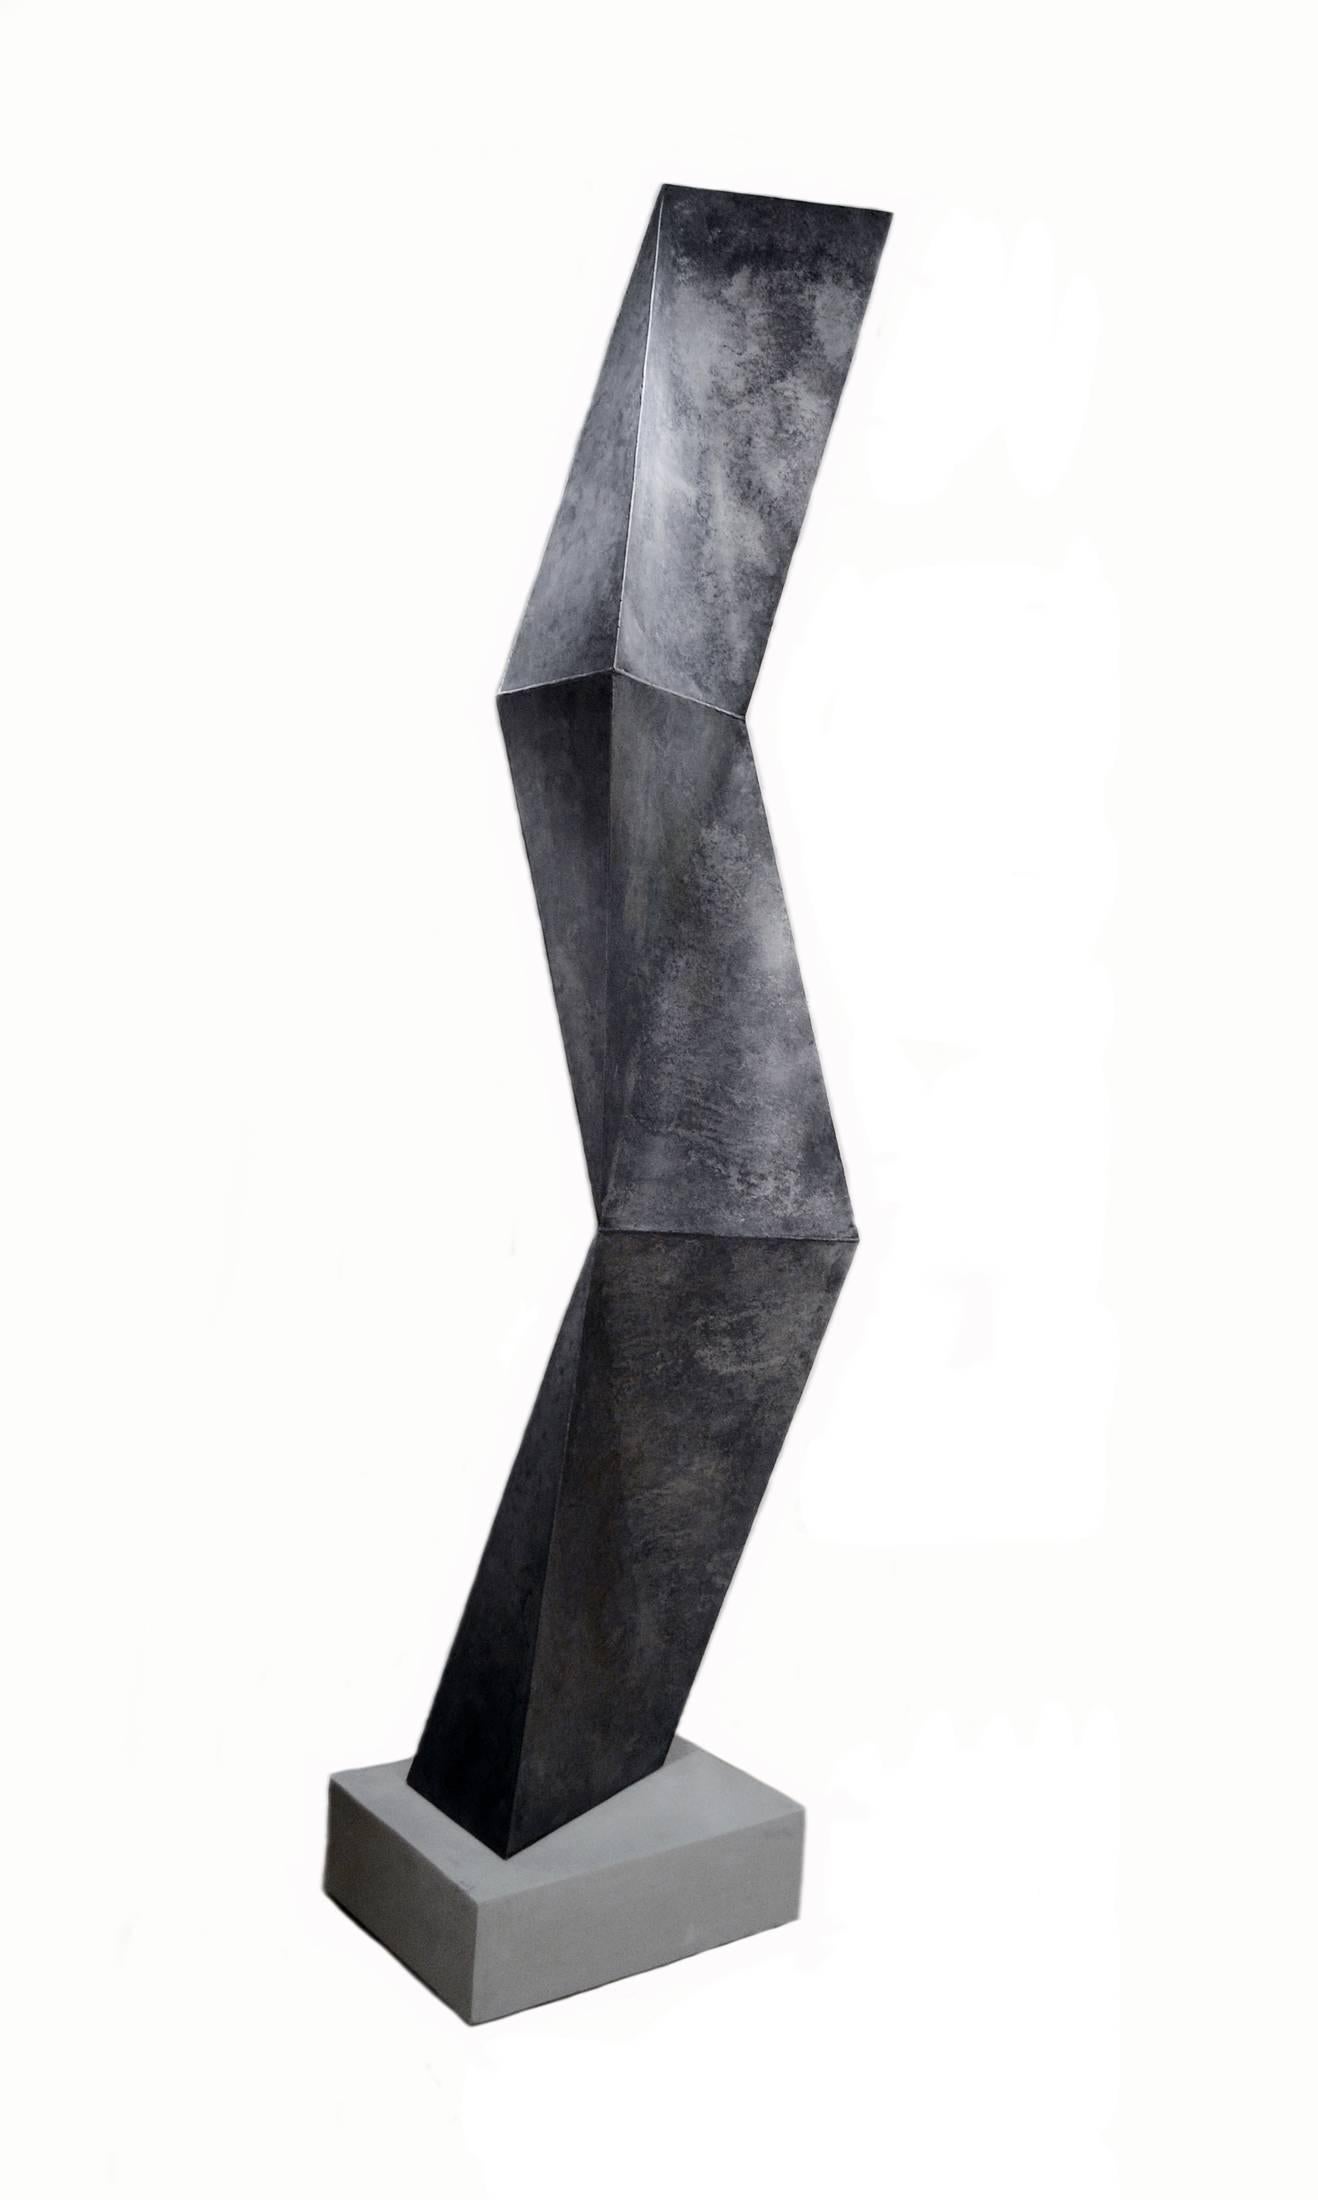 Scott Donadio is a listed and highly respected and collected artist whose monumental steel abstract sculptures and his refined carved stone and marble sculptures are in many private collections throughout the U.S., Canada, Europe and Australia, as